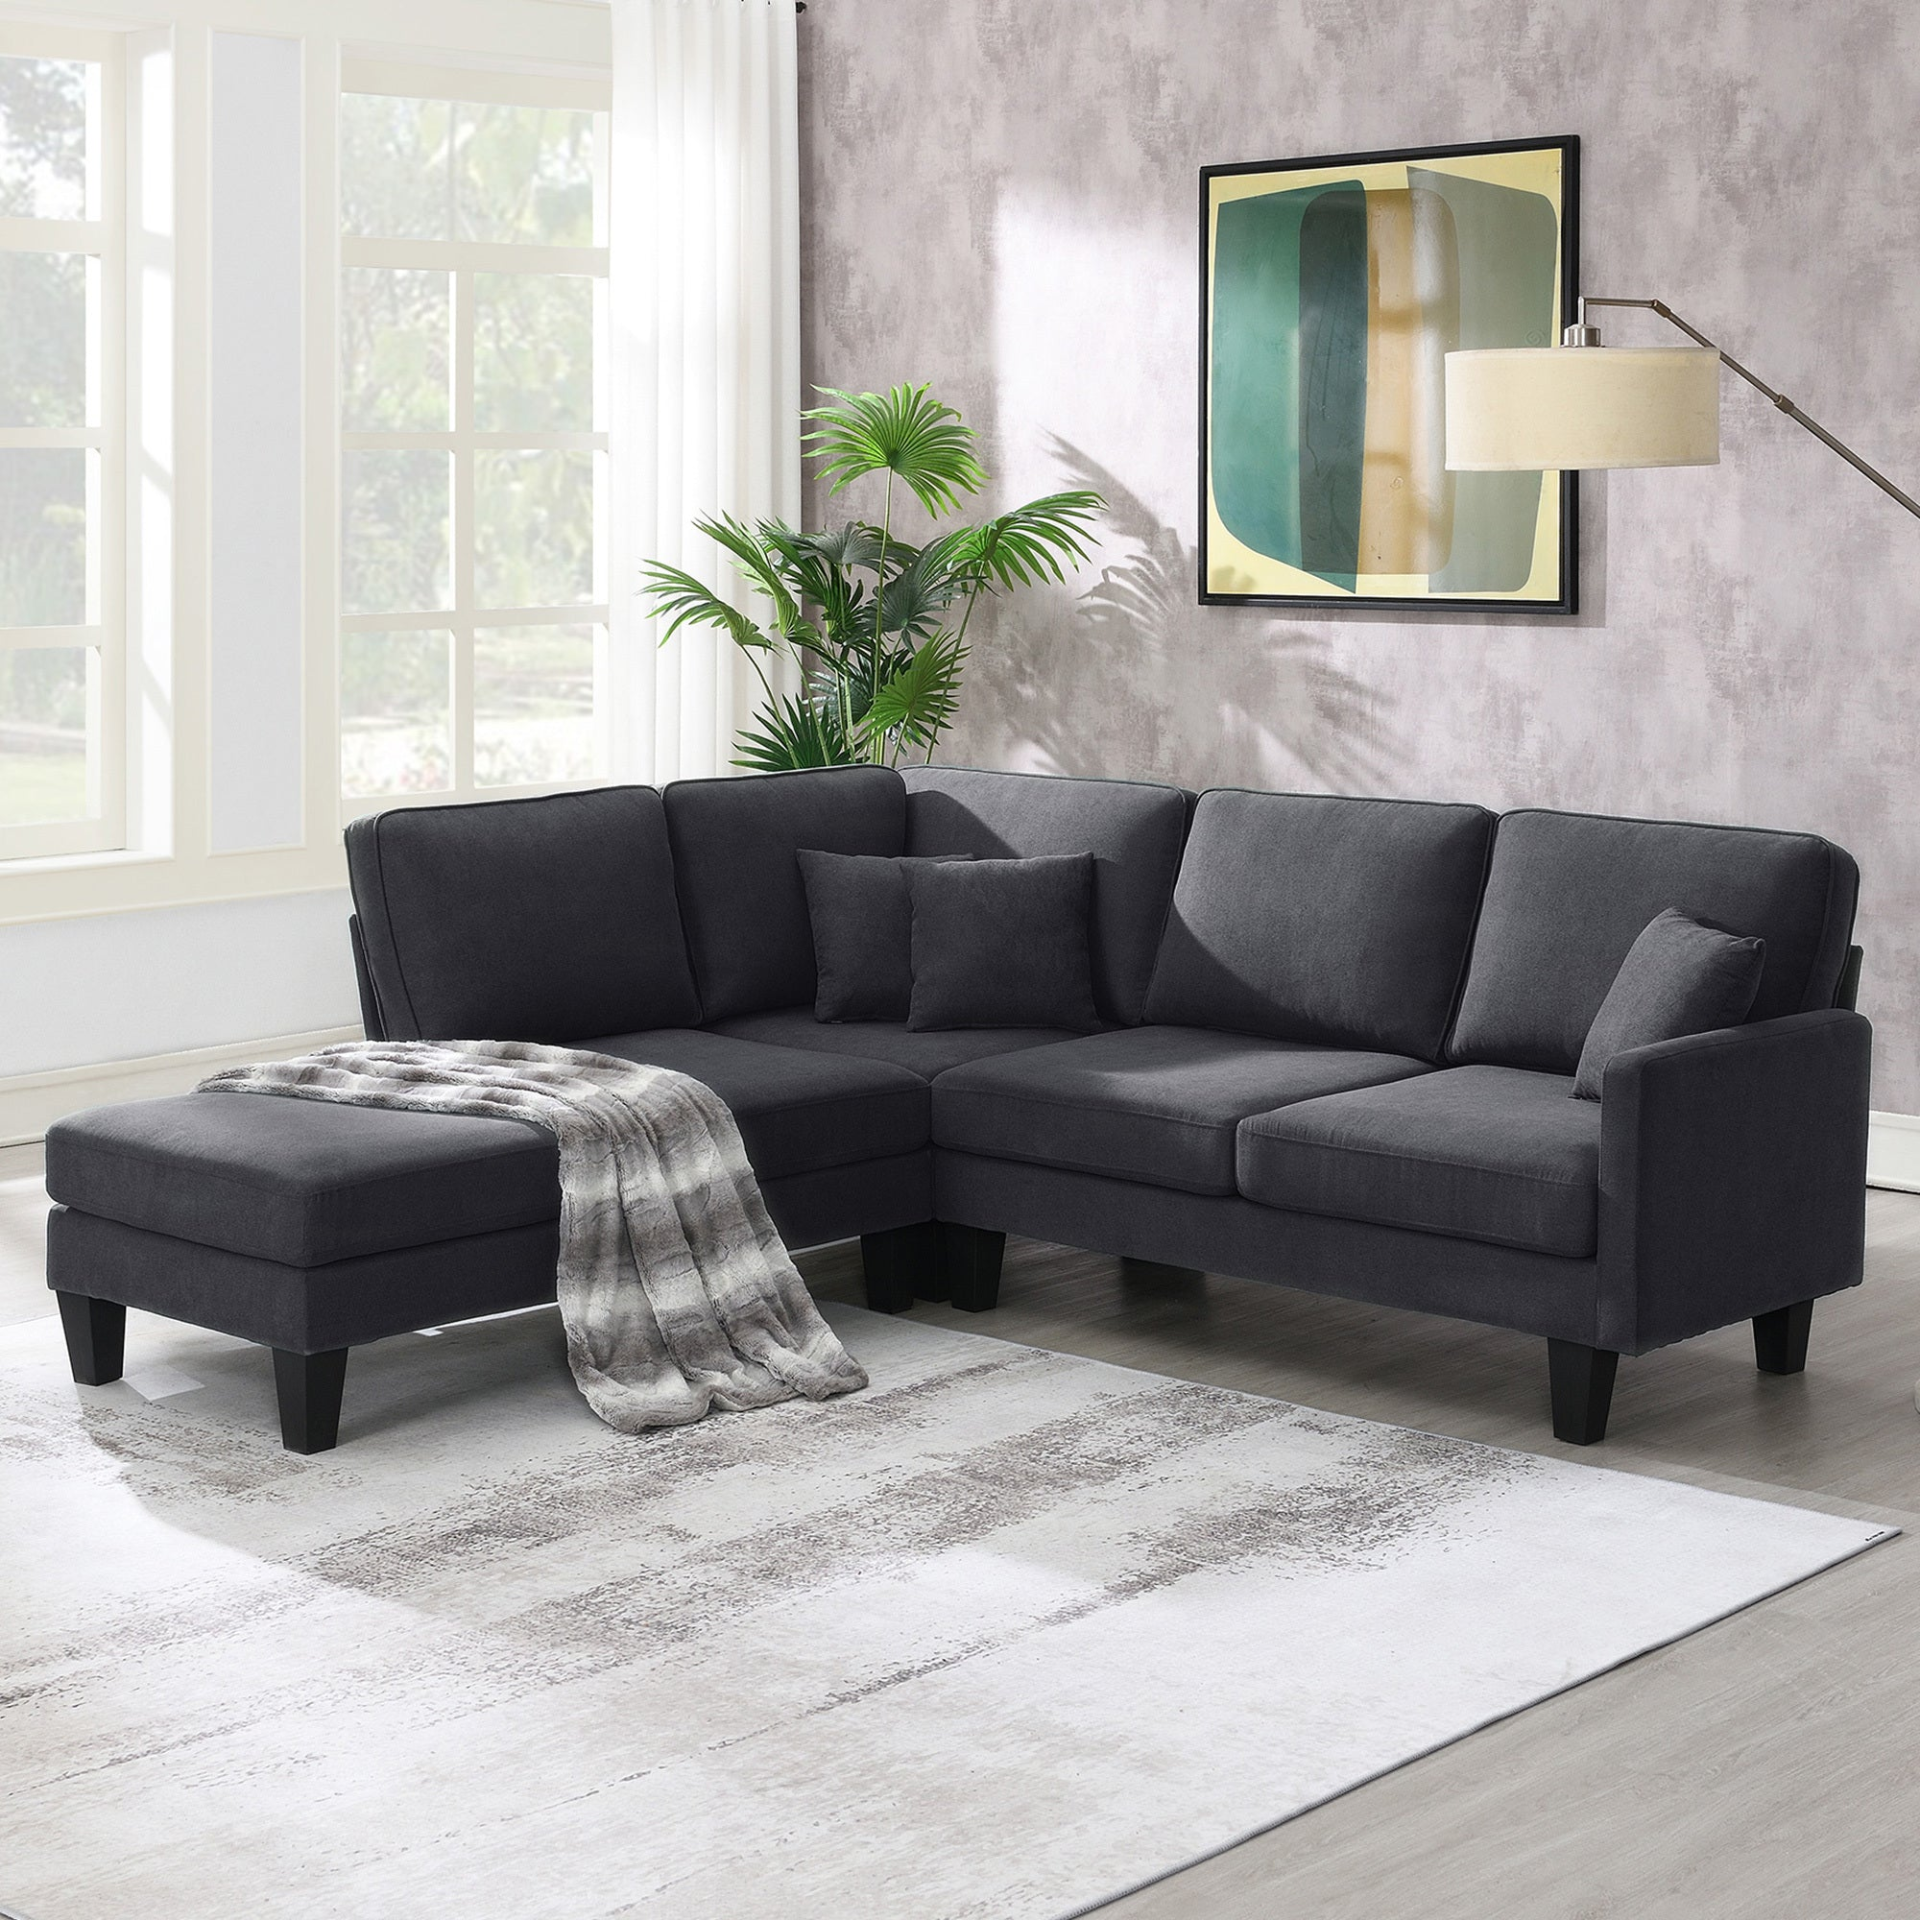 Dark Grey - Simple Luxe L-Shape 5-Seat Sectional Sofa with Chaise Lounge and 3 Pillows (90"x88")